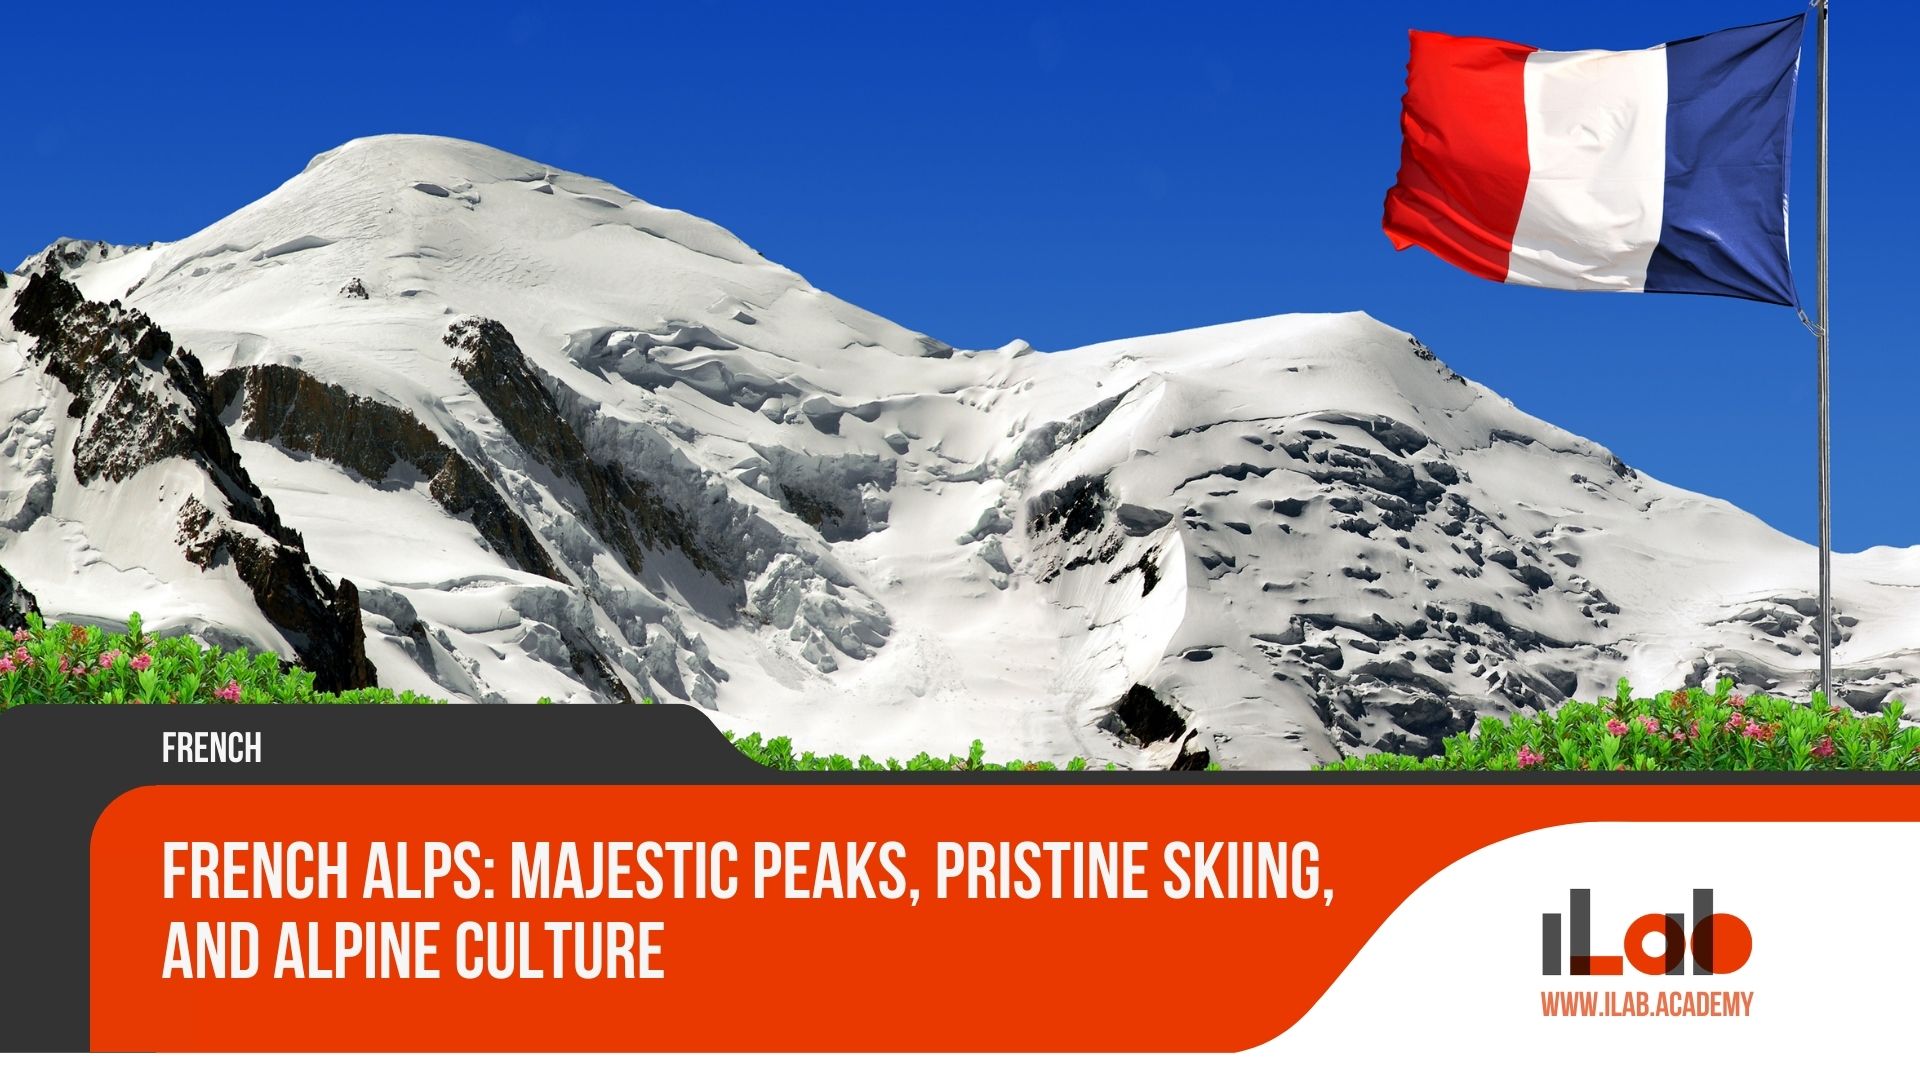 French Alps: Majestic Peaks, Pristine Skiing, and Alpine Culture